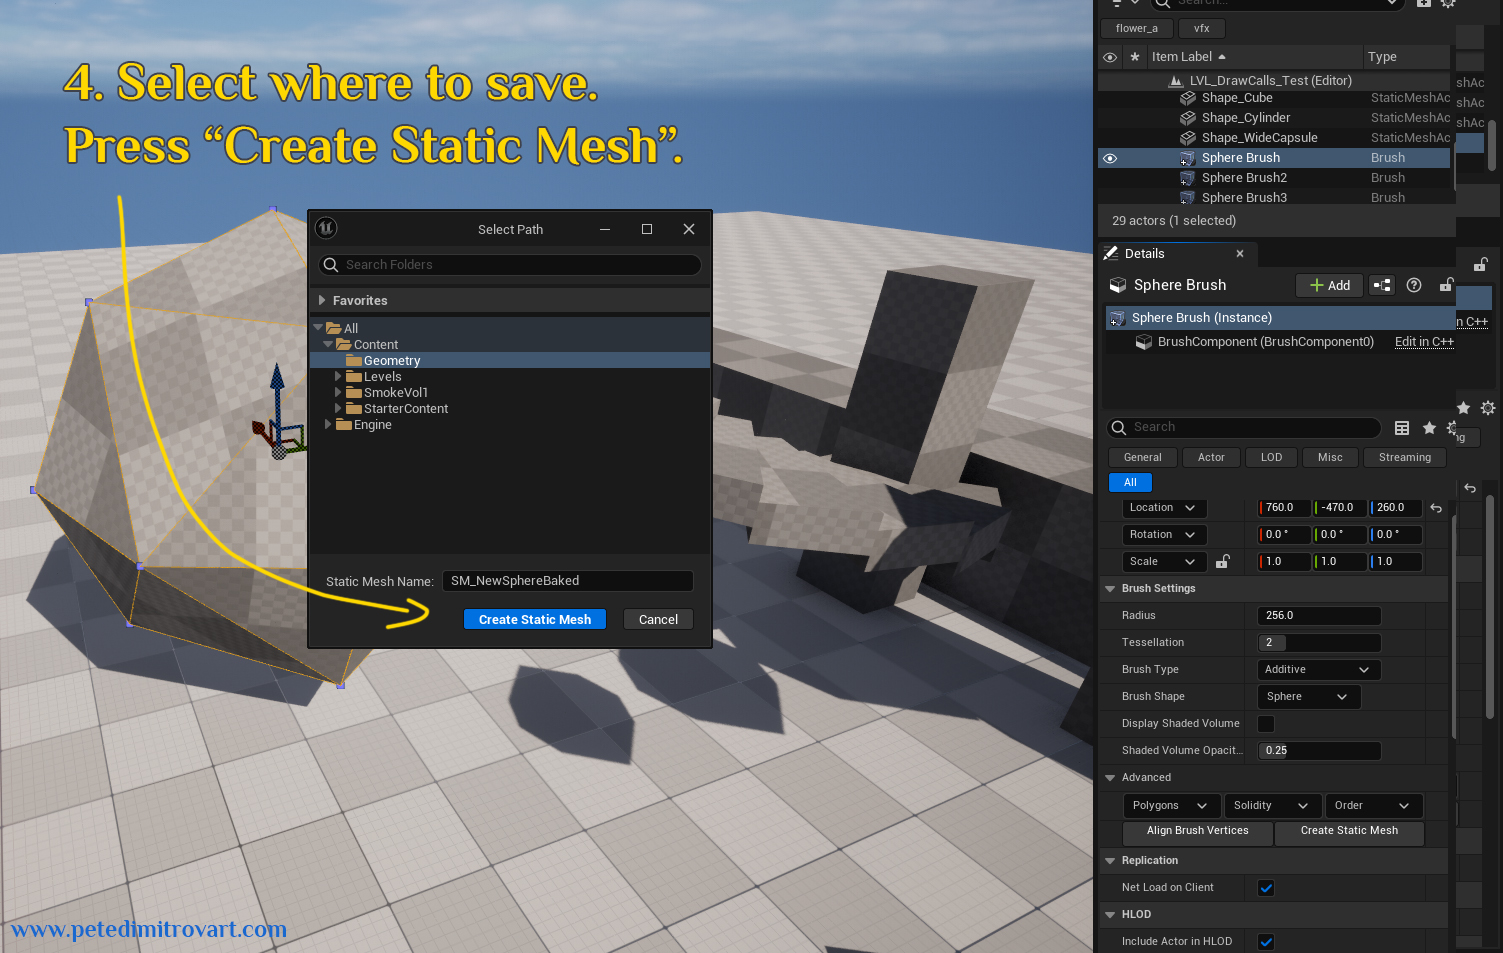 Same image as before but now there is a submenu that has popped up on the screen after pressing “Create Static Mesh” the first time around. This menu shows the project directory and asks us in what folder to save the geometry that we are about to create. Yellow text is transcribed below.